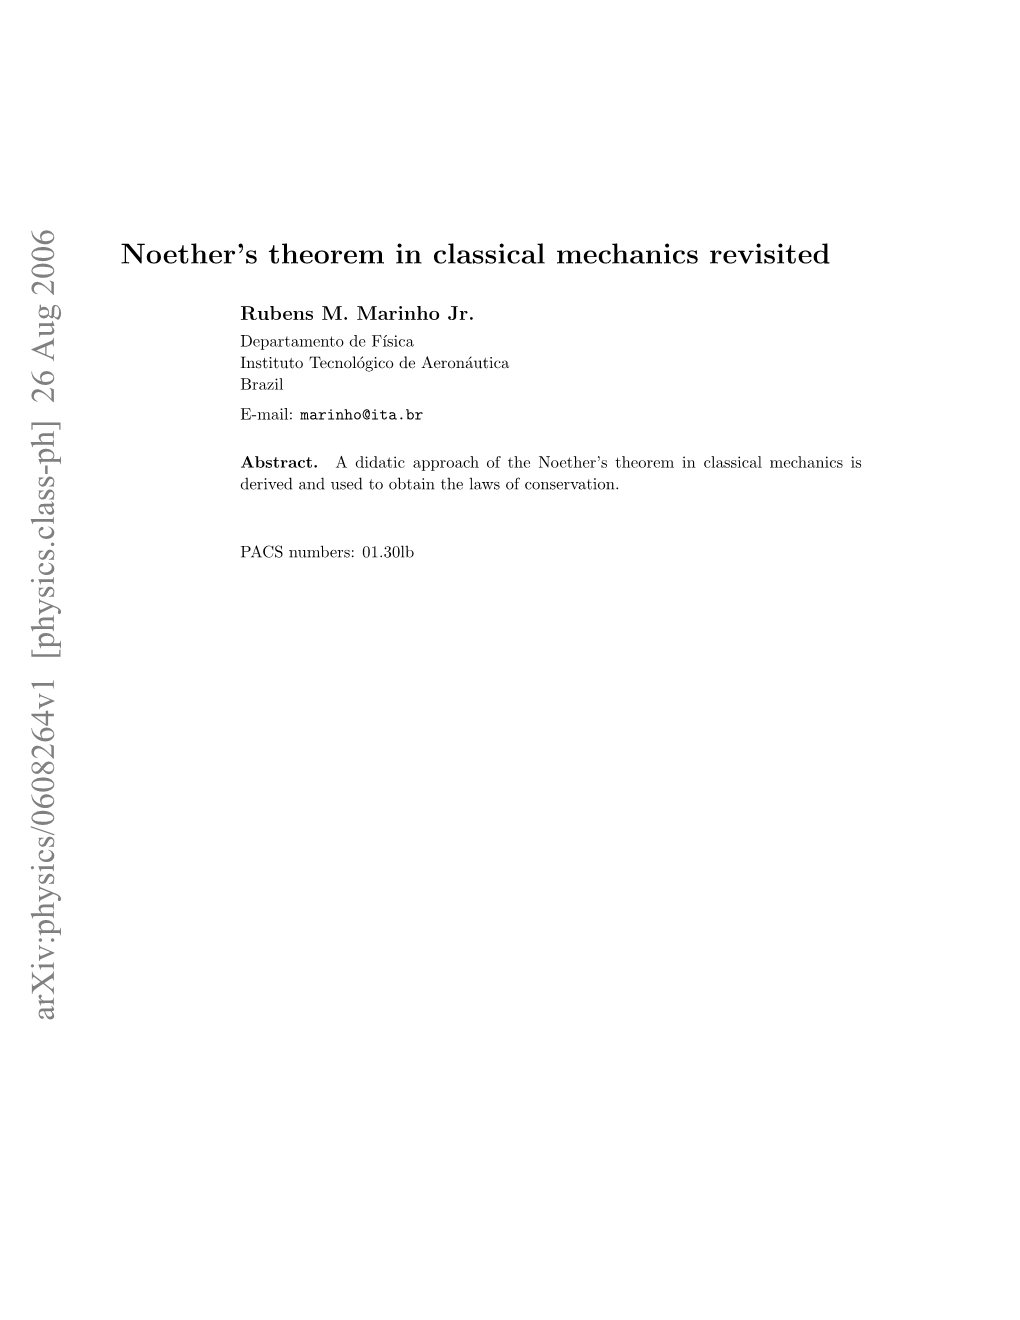 Noether's Theorem in Classical Mechanics Revisited